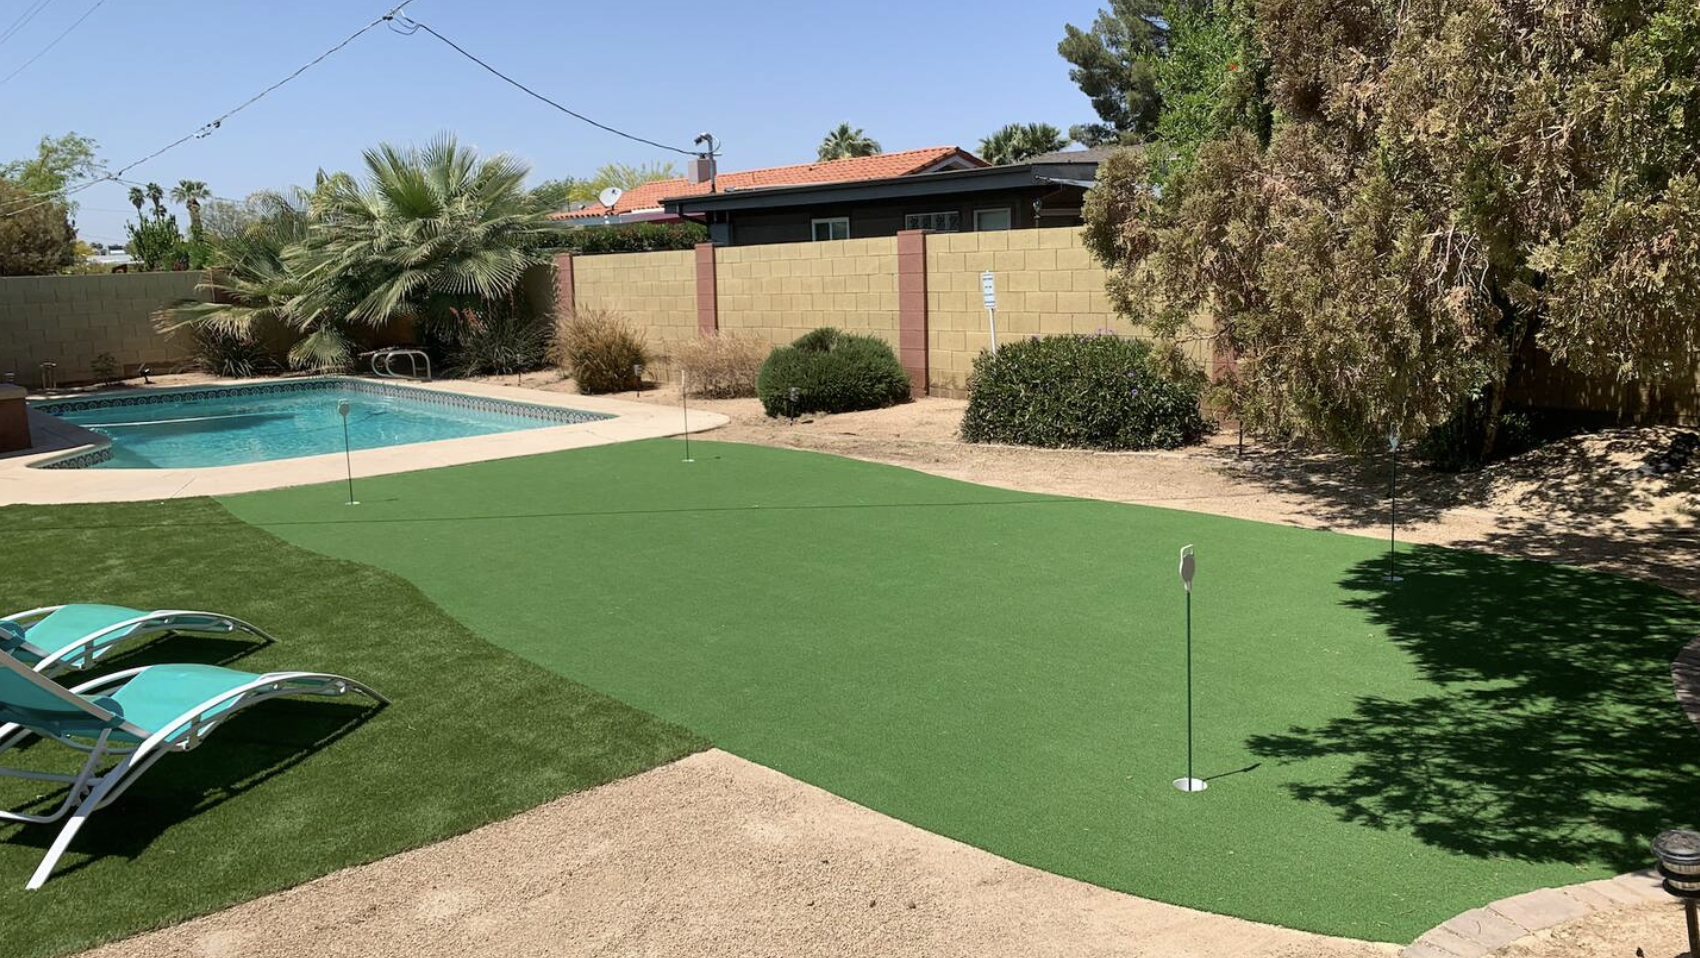 Putting Green for some outdoor fun